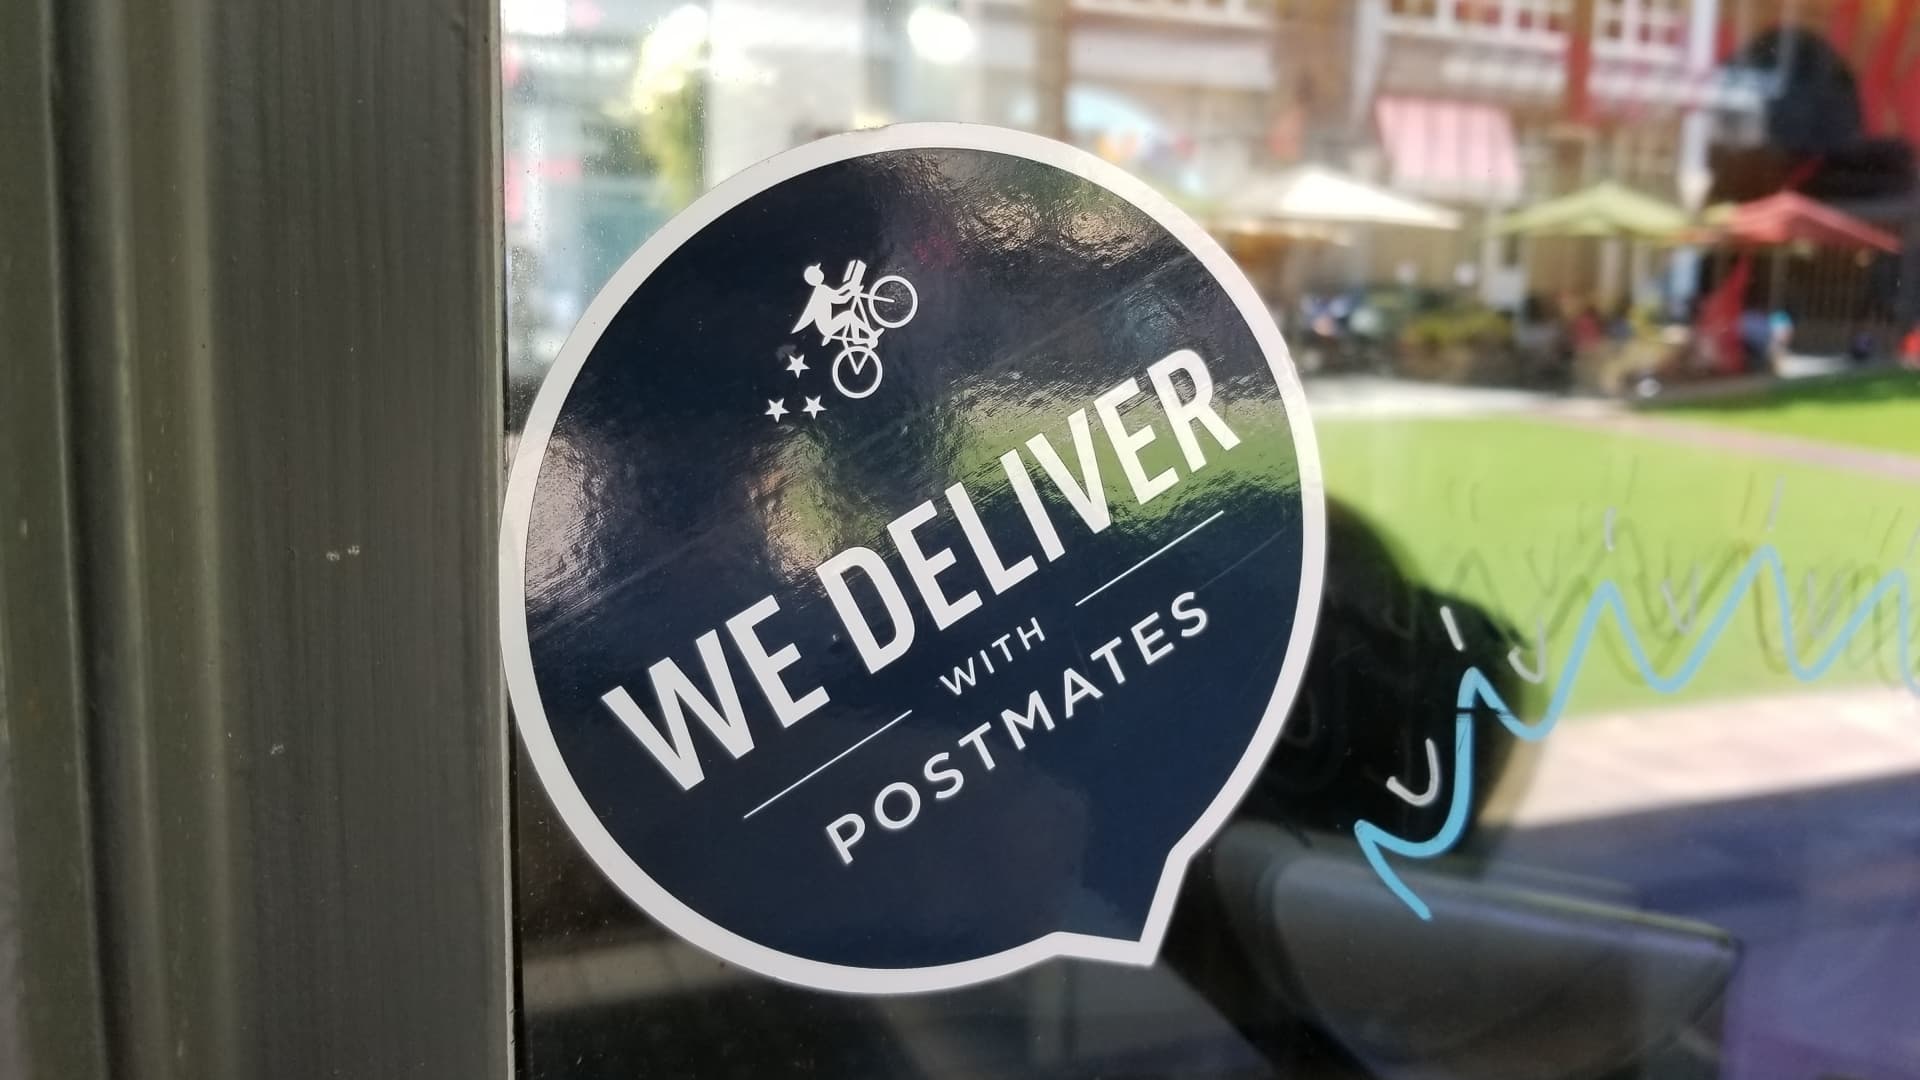 Postmates is deciding between going public and selling to Uber or special purpose acquisition company